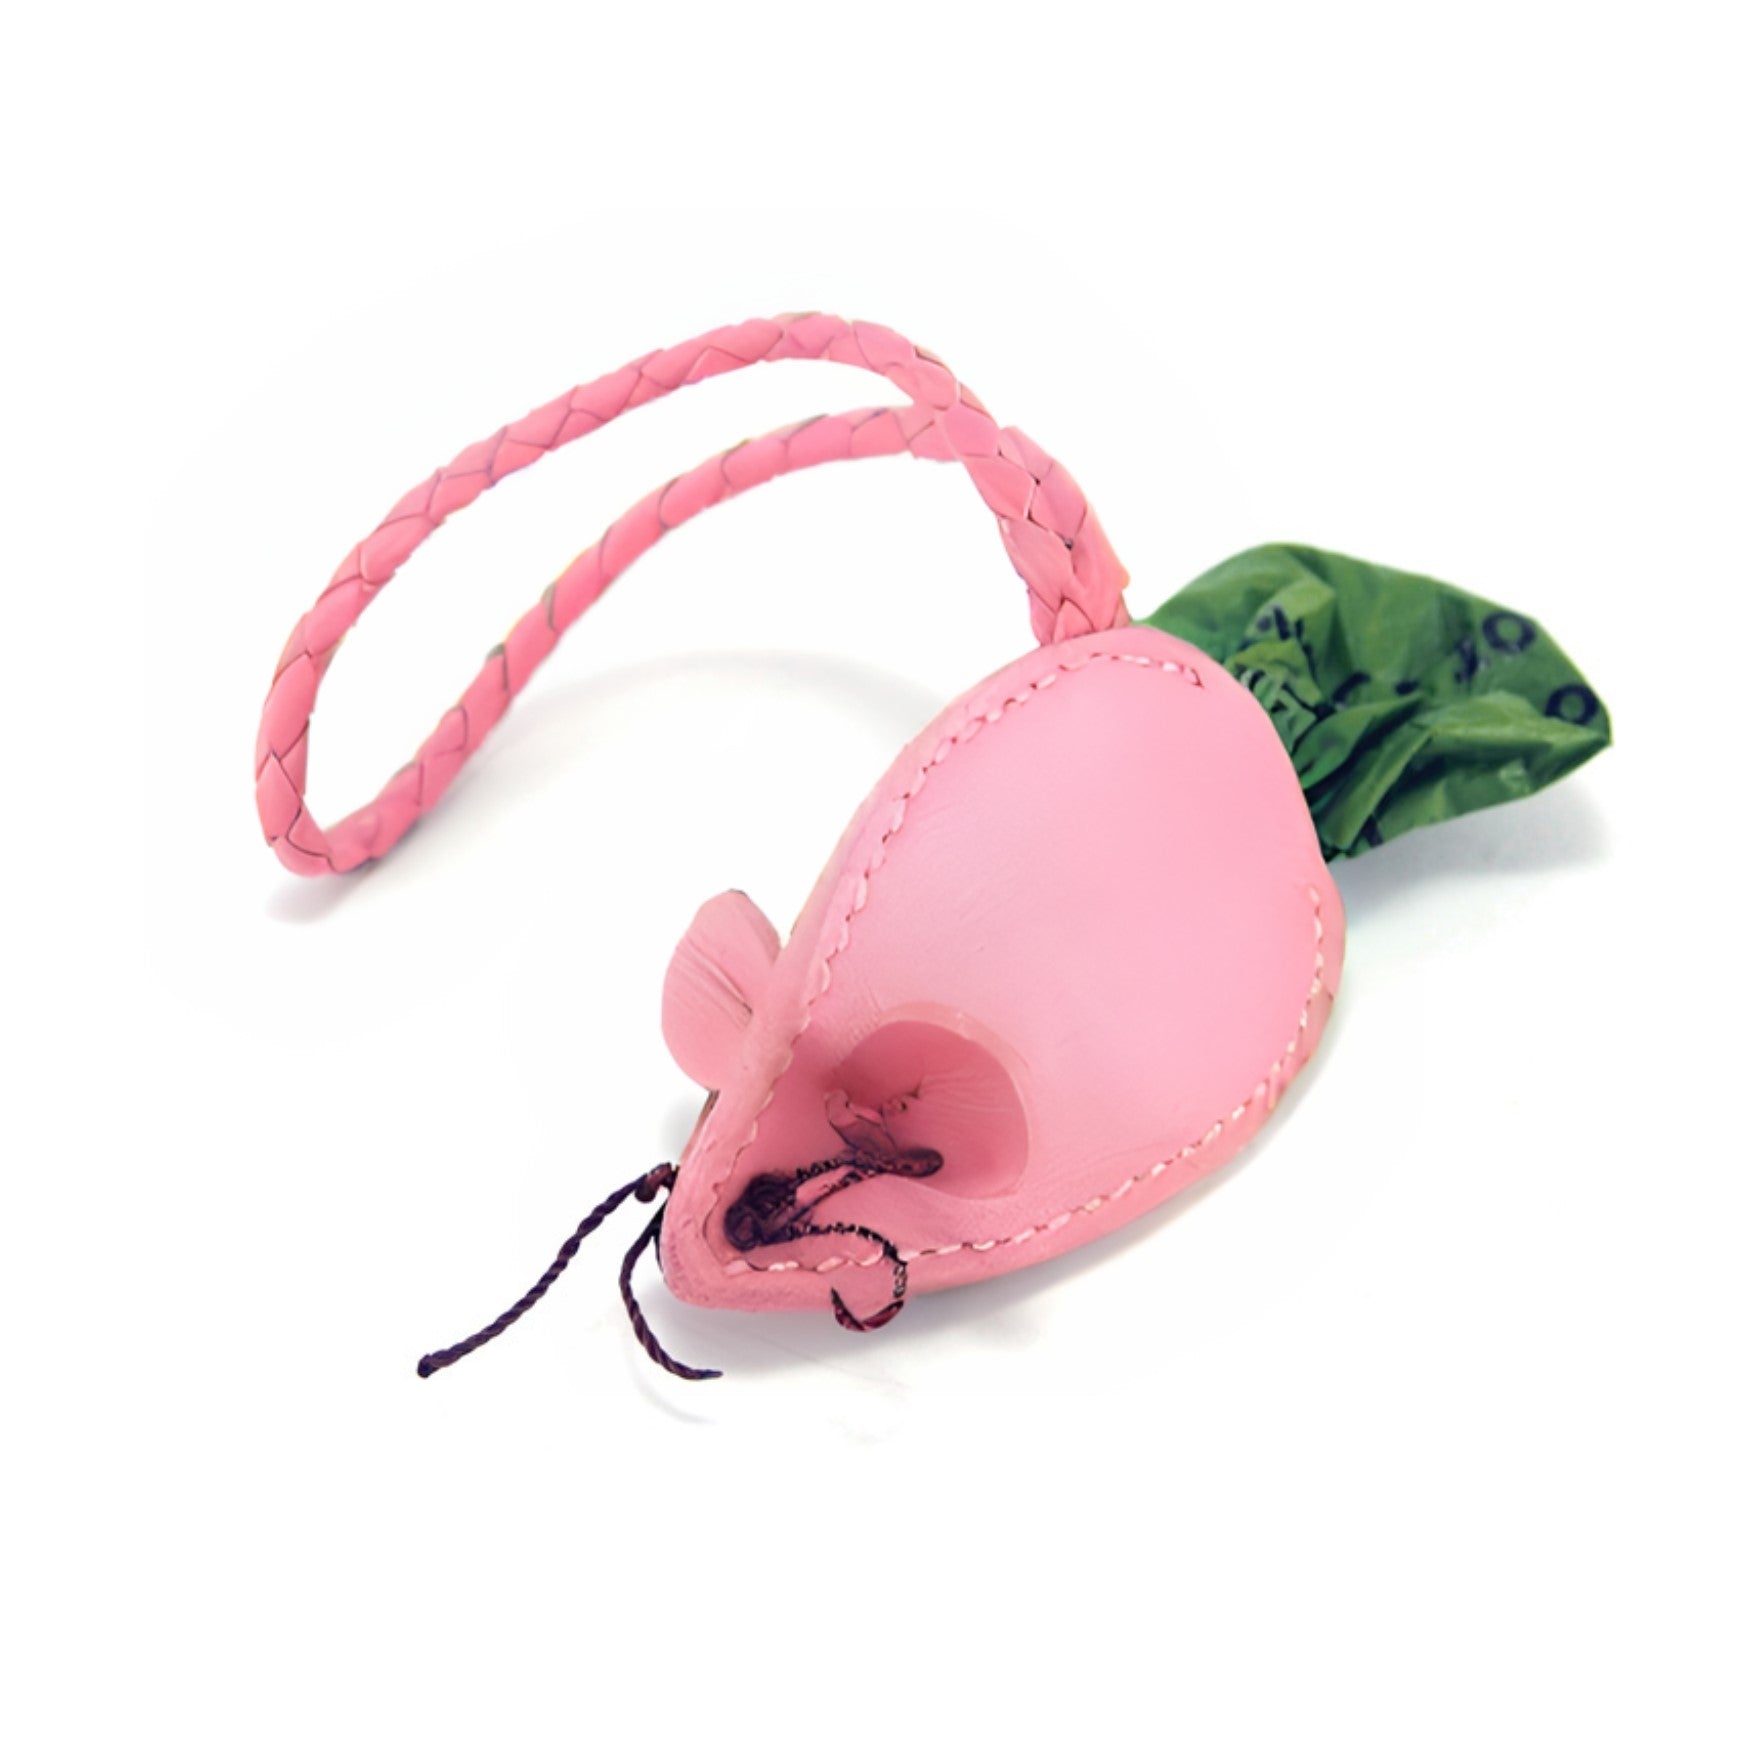 A pink, heart-shaped, braided buffalo leather Mouse Poobag Dispenser wristlet clutch with a leafy green pull-tab, displaying a unique floral-inspired design, isolated on a white background by Georgie Paws.